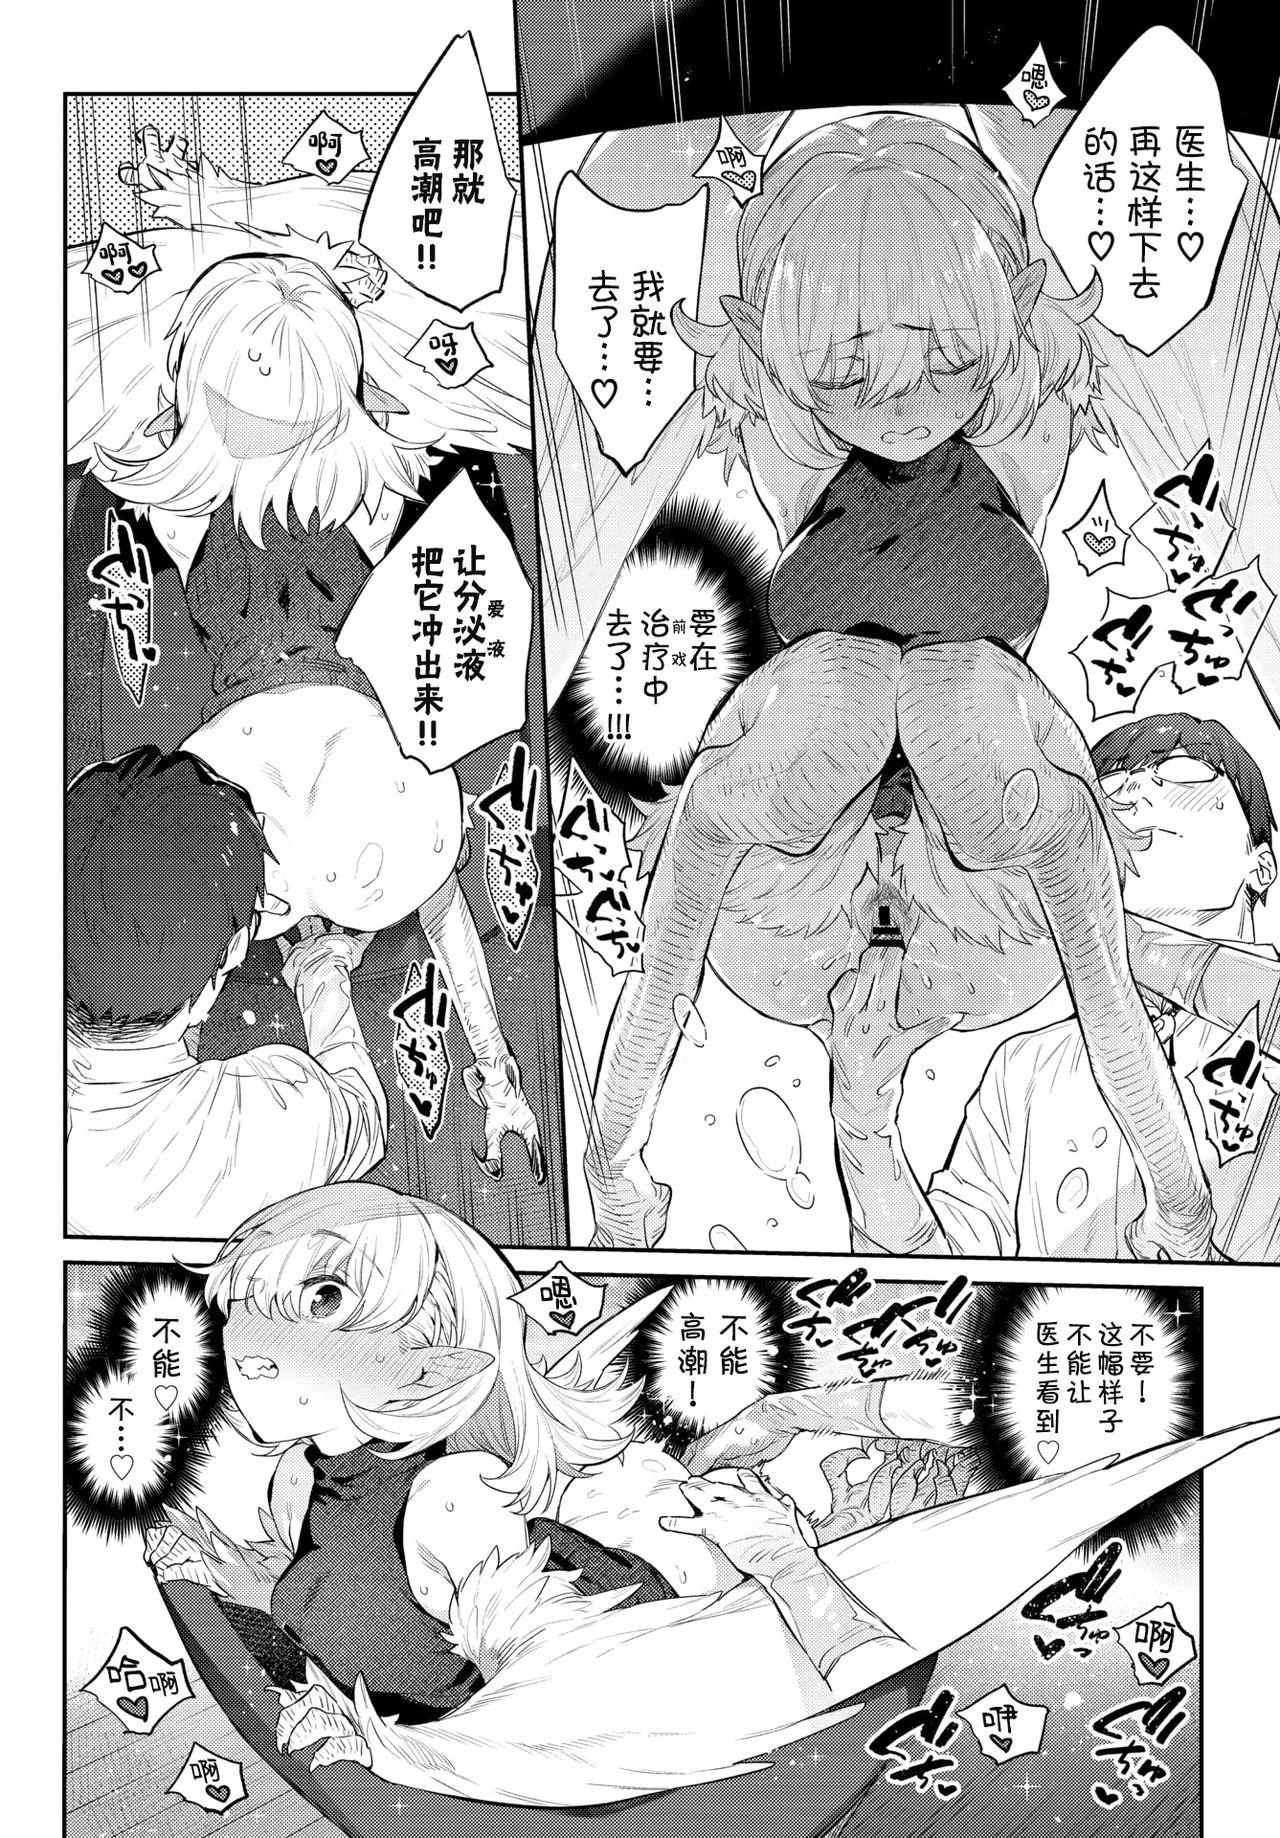 Ihou no Otome - Monster Girls in Another World 135